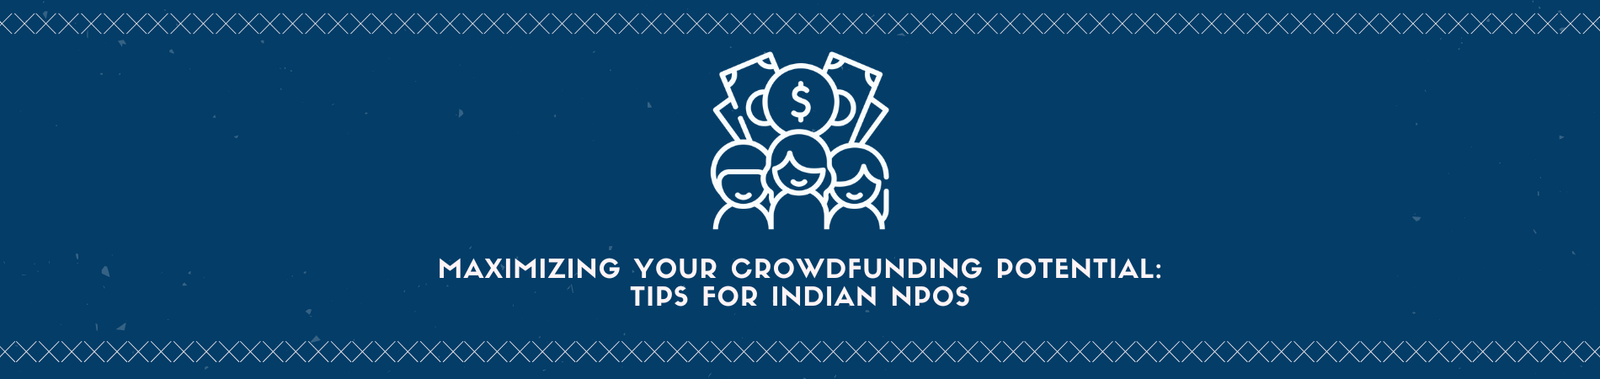 Maximizing Your Crowdfunding Potential: Tips for Indian NPOs